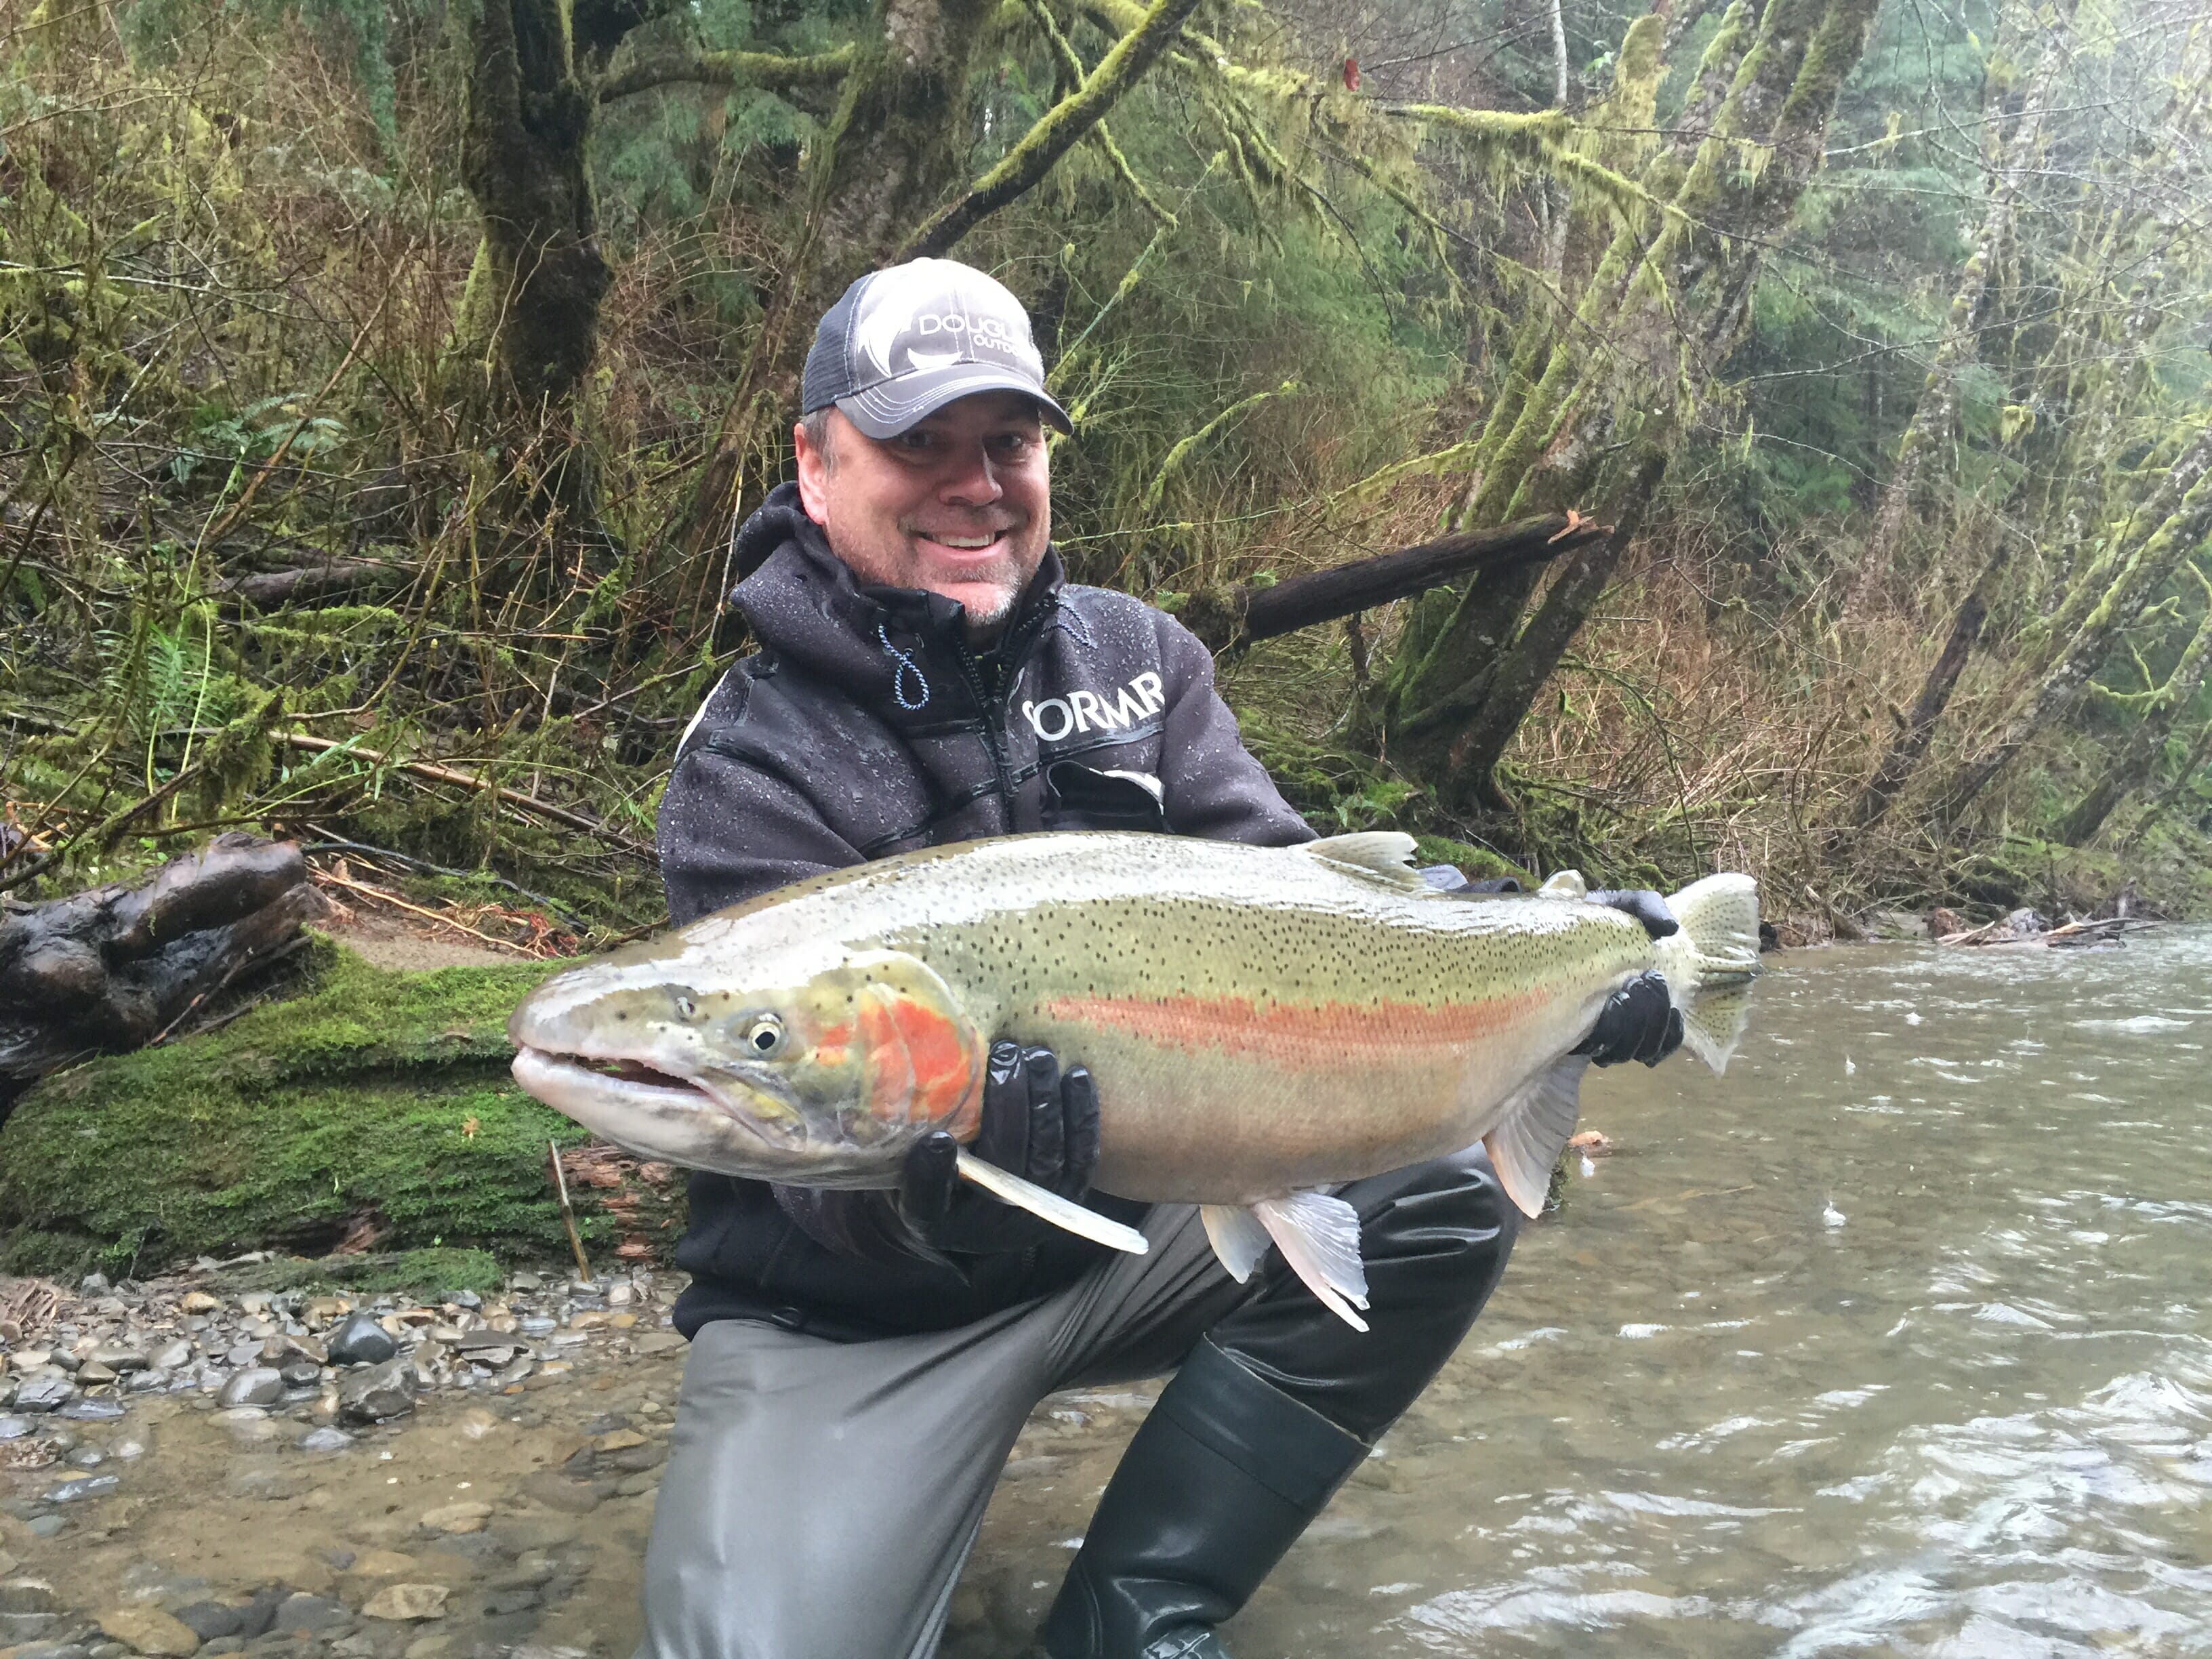 What makes people go crazy for steelhead?